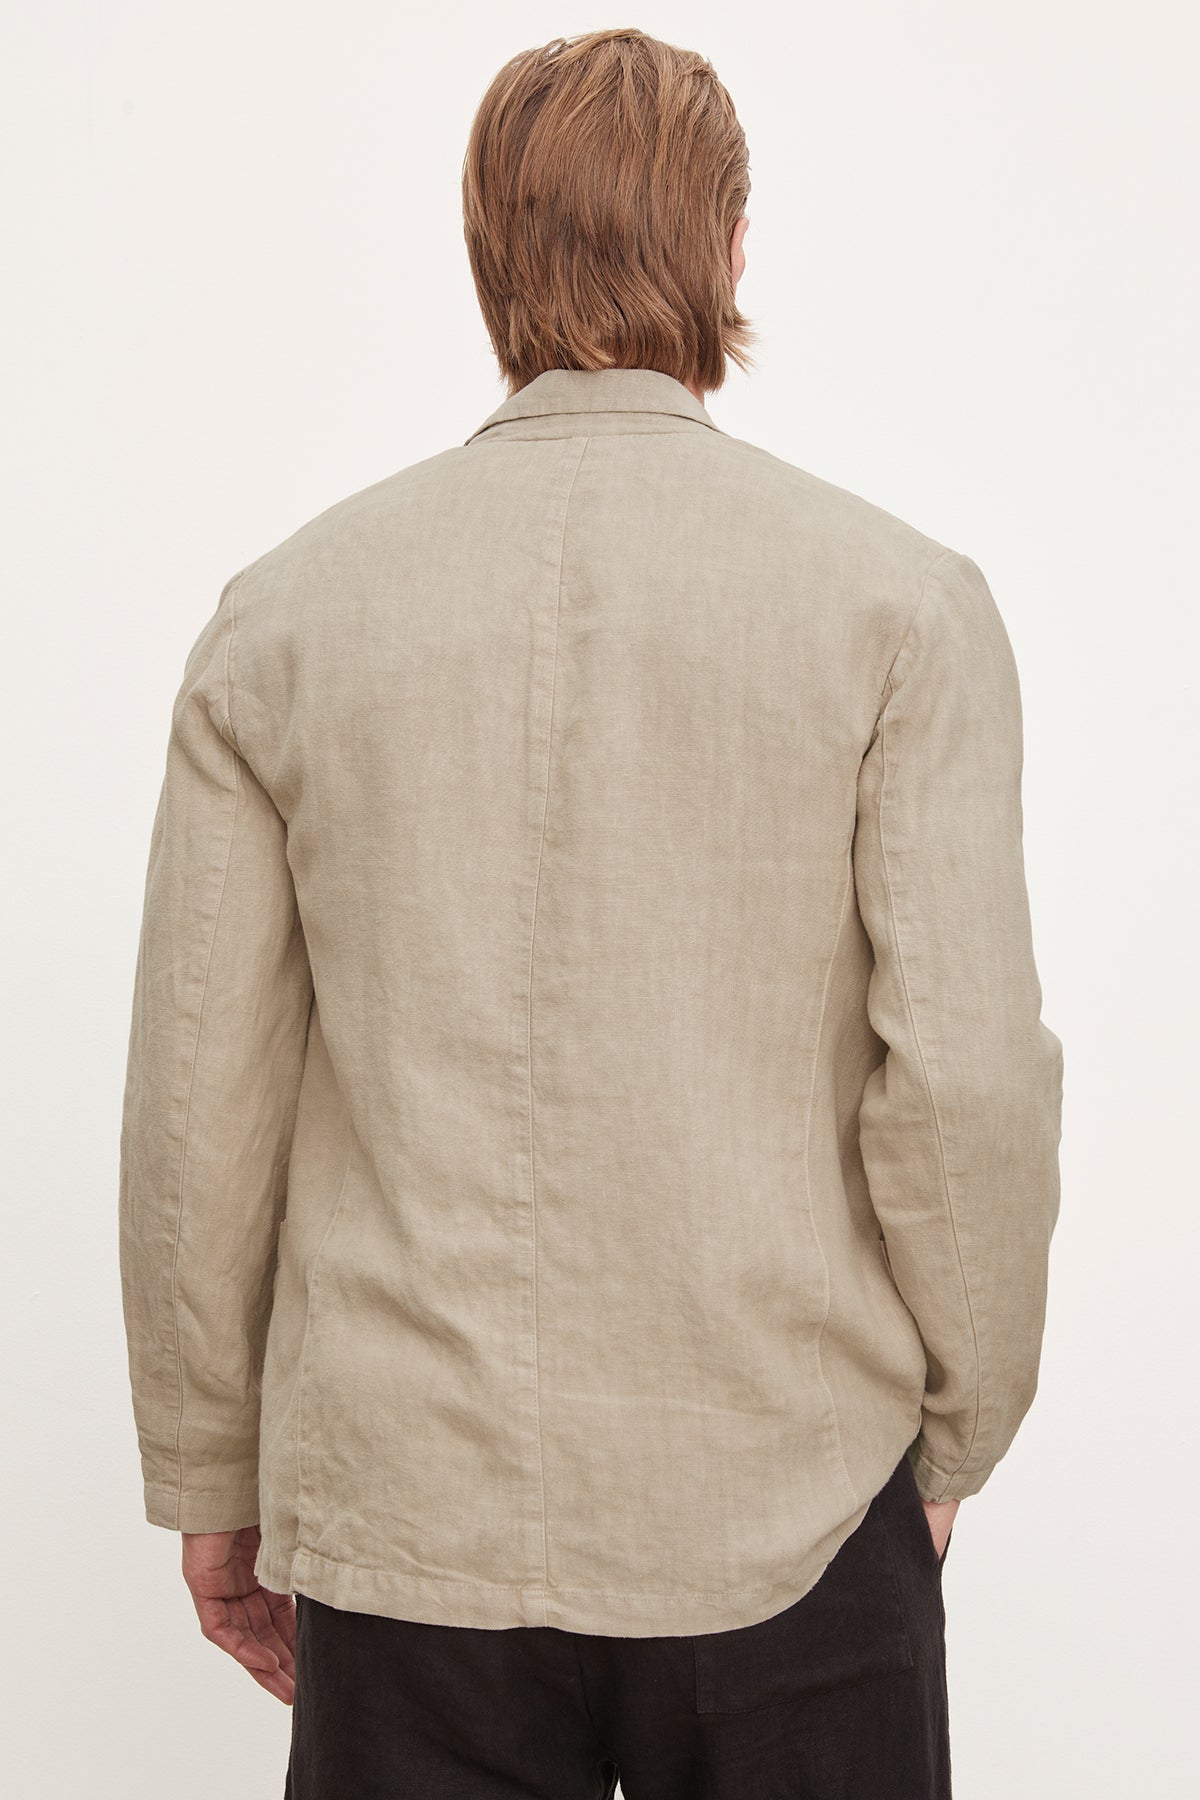 A man viewed from behind, wearing a beige tailored fit linen blazer by Velvet by Graham & Spencer and dark Phelan Linen Pants, standing against a plain white background.-36532707459265